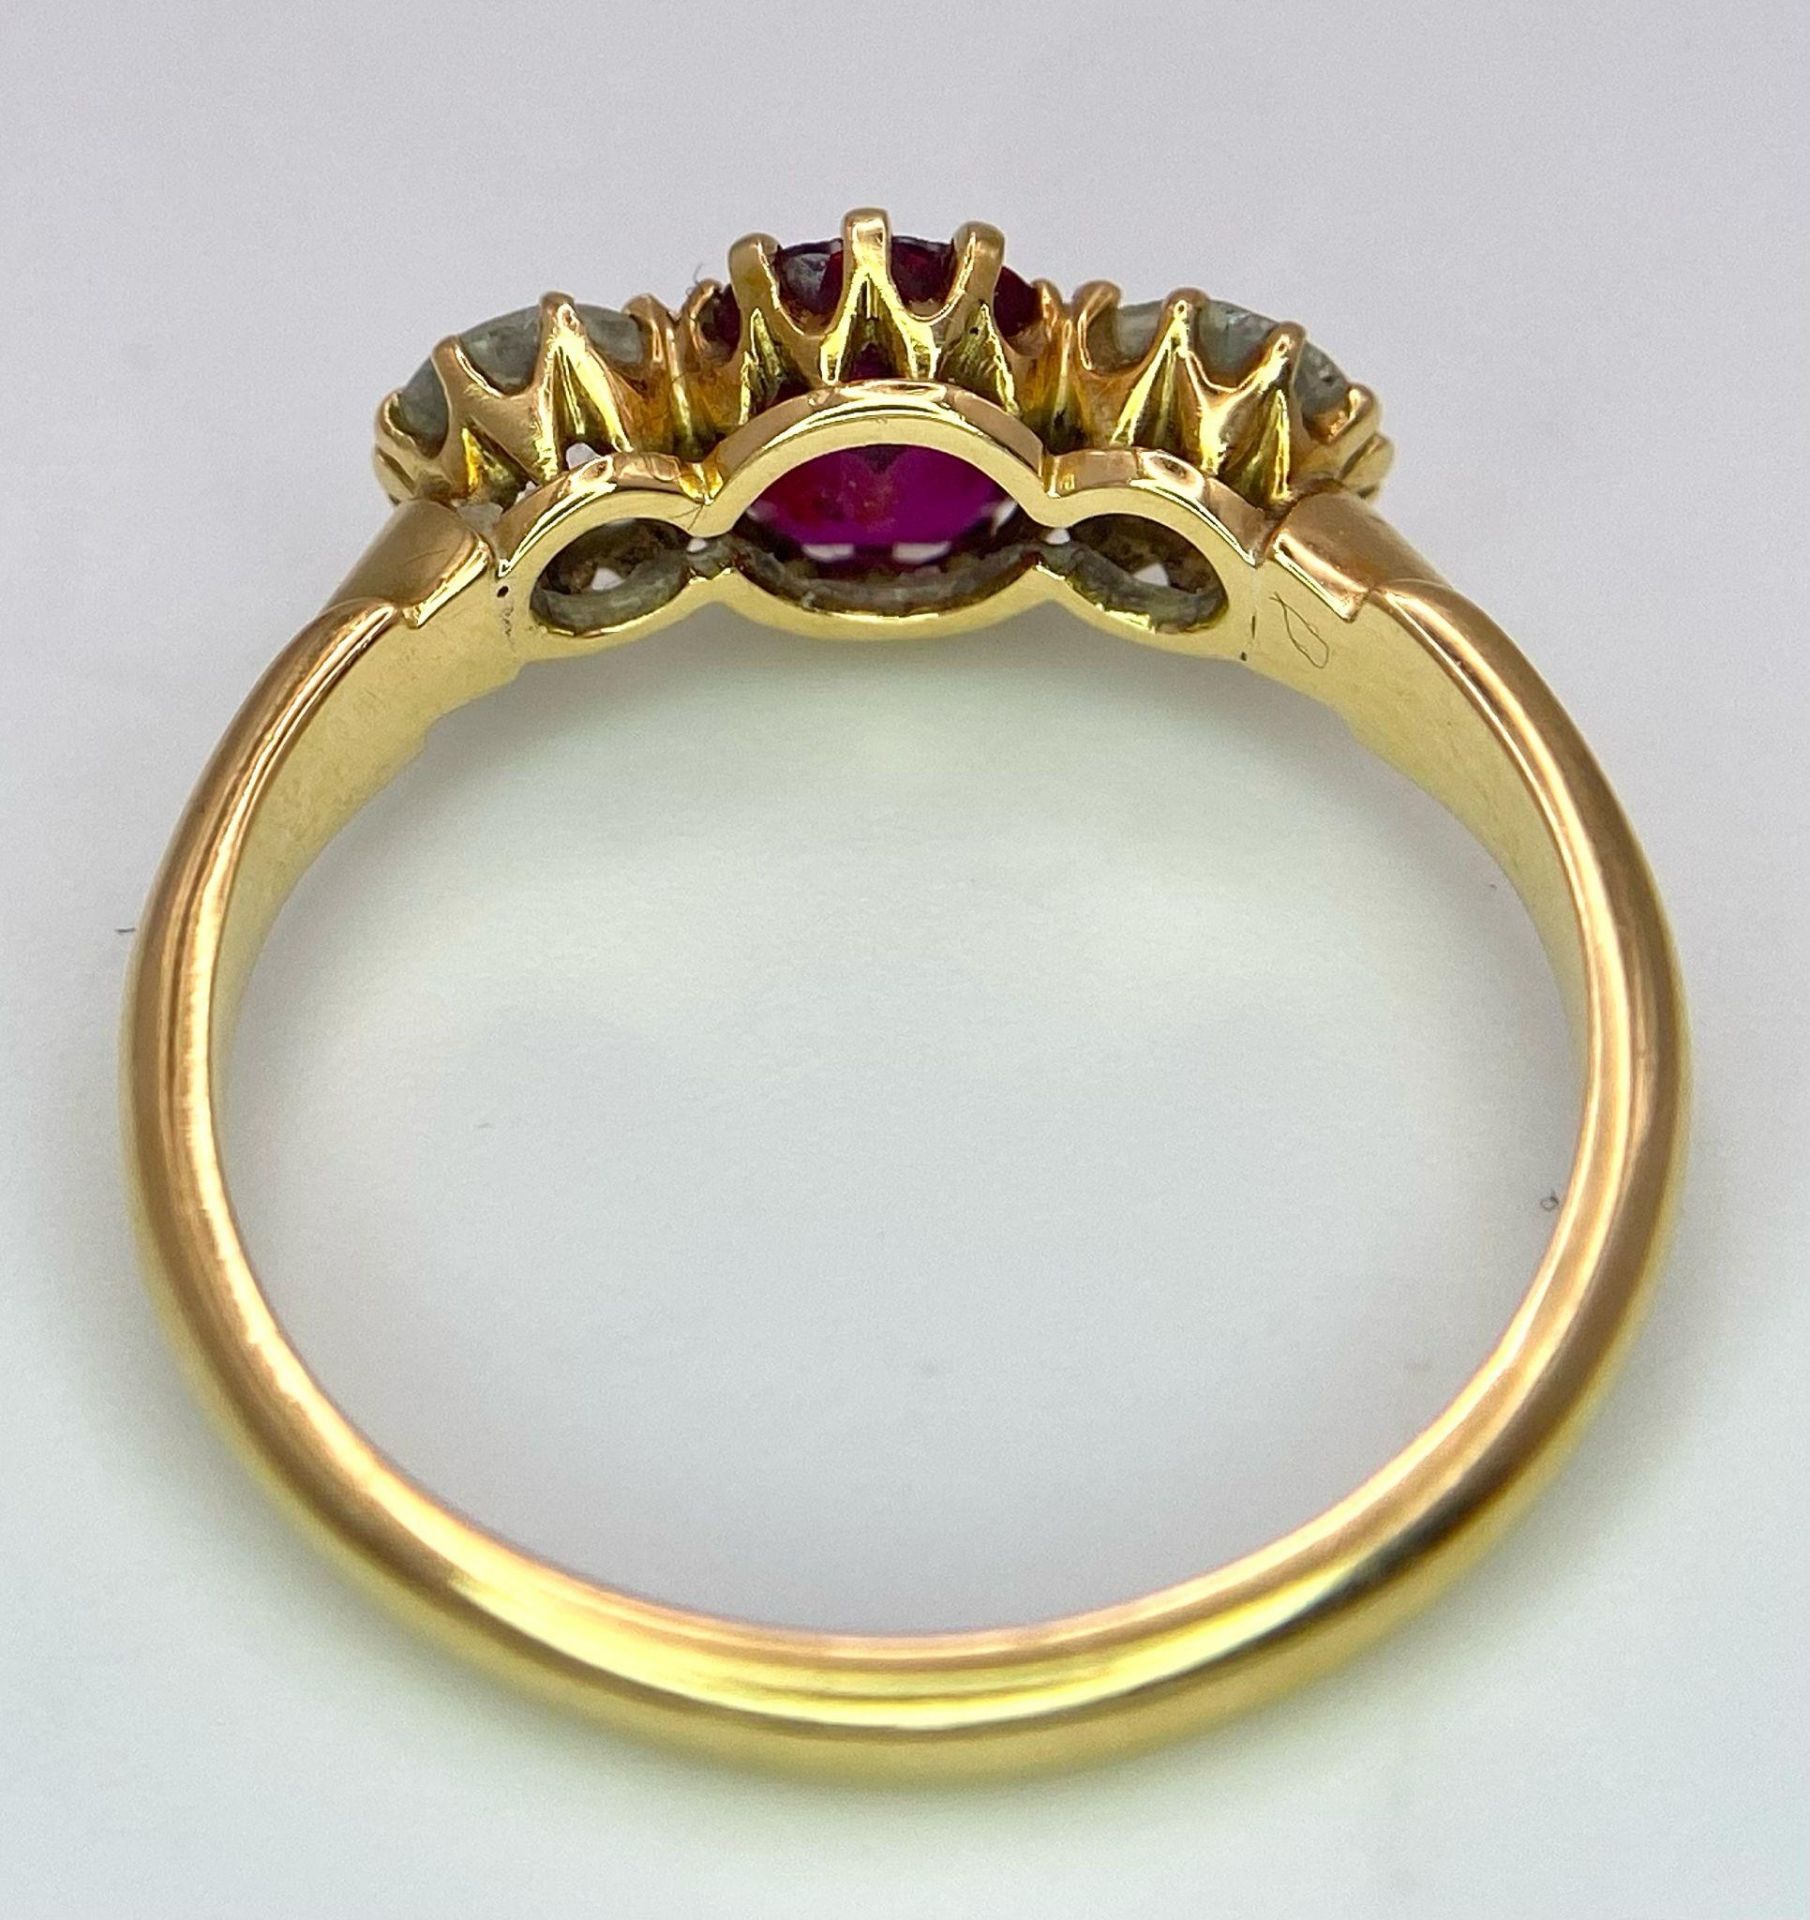 A Mesmerising 18K Yellow Gold, Ruby and Diamond Ring. A deep red oval cut ruby sits central - Bild 7 aus 9